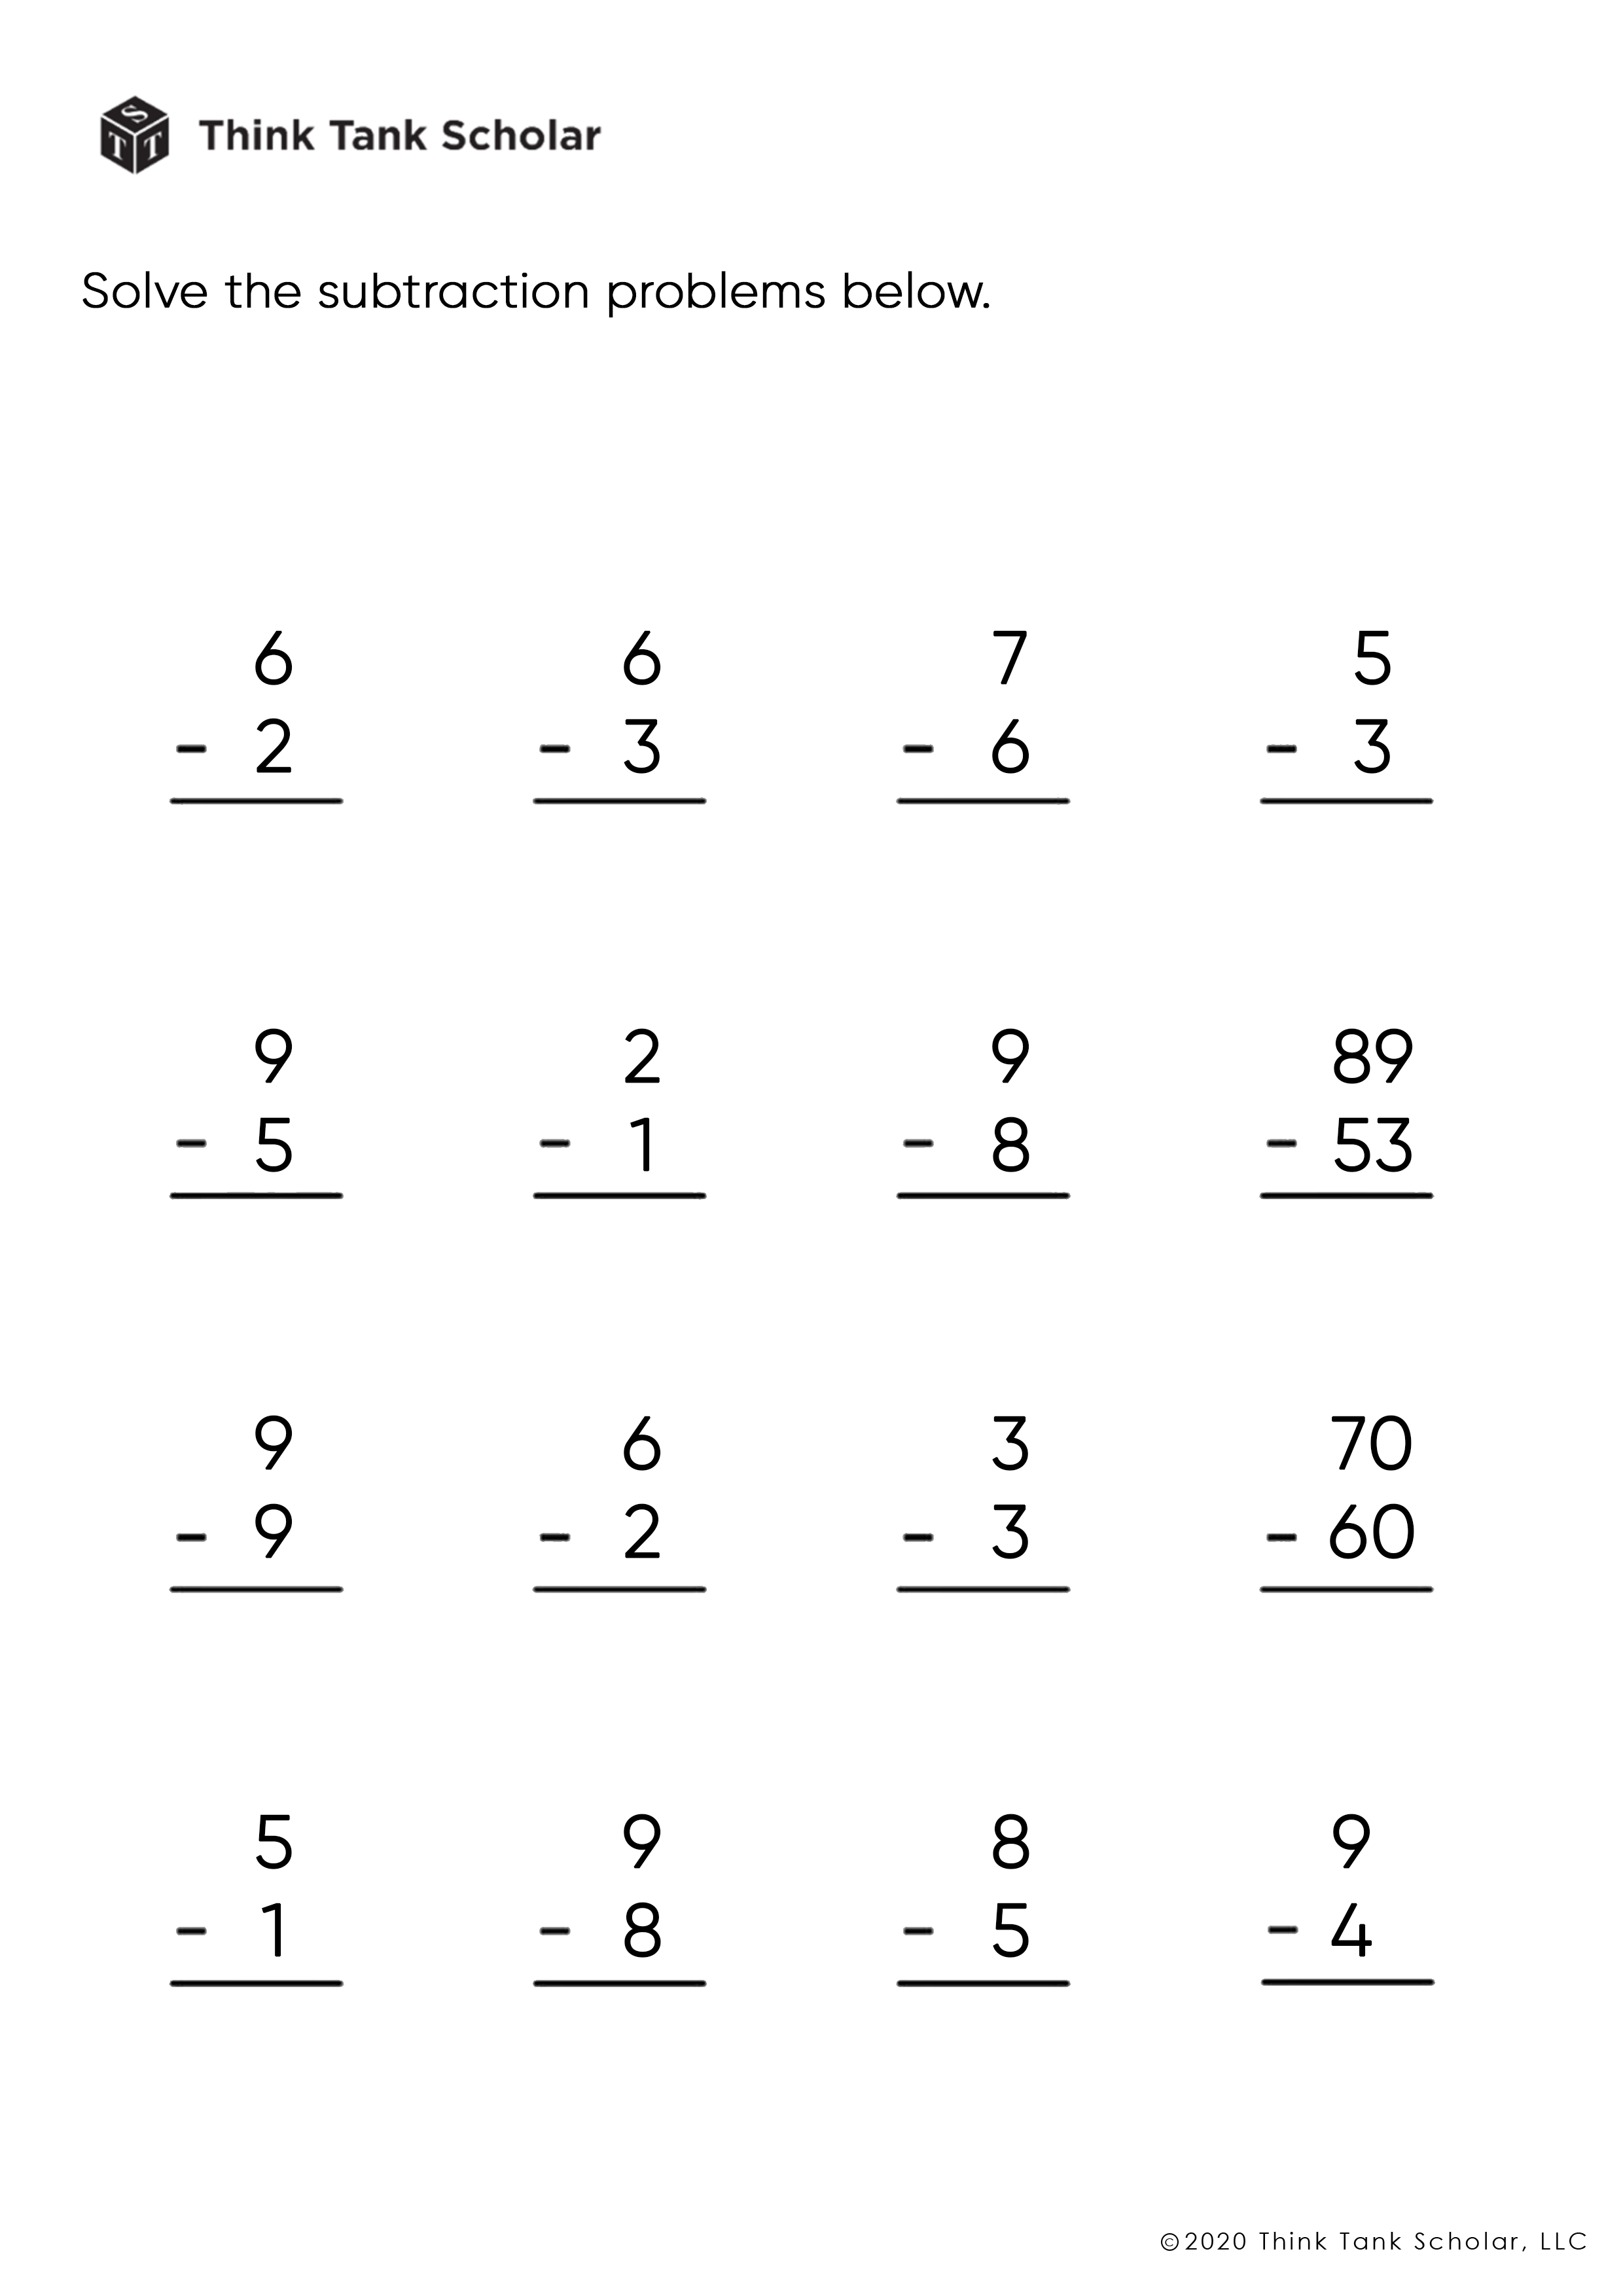 Subtraction Worksheets Exercises Printable PDF FREE Think Tank Scholar